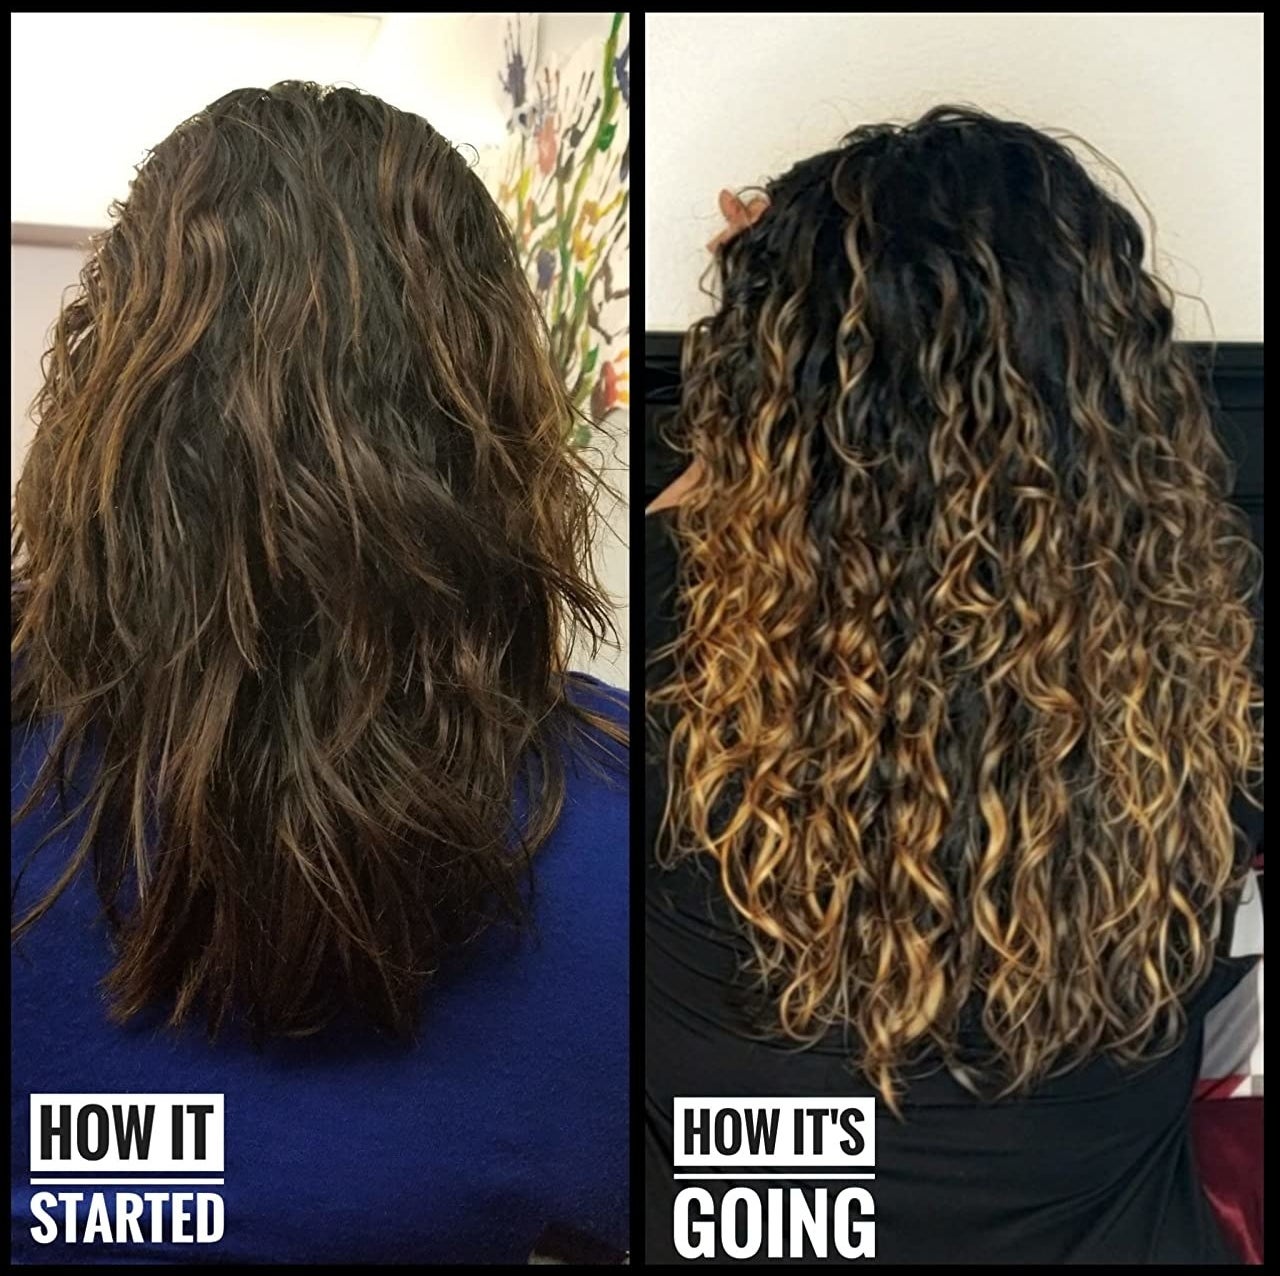 reviewer with images of &quot;how it started&quot; with fairly straight hair slightly wavy and &quot;how it&#x27;s going&quot; with much curlier hair